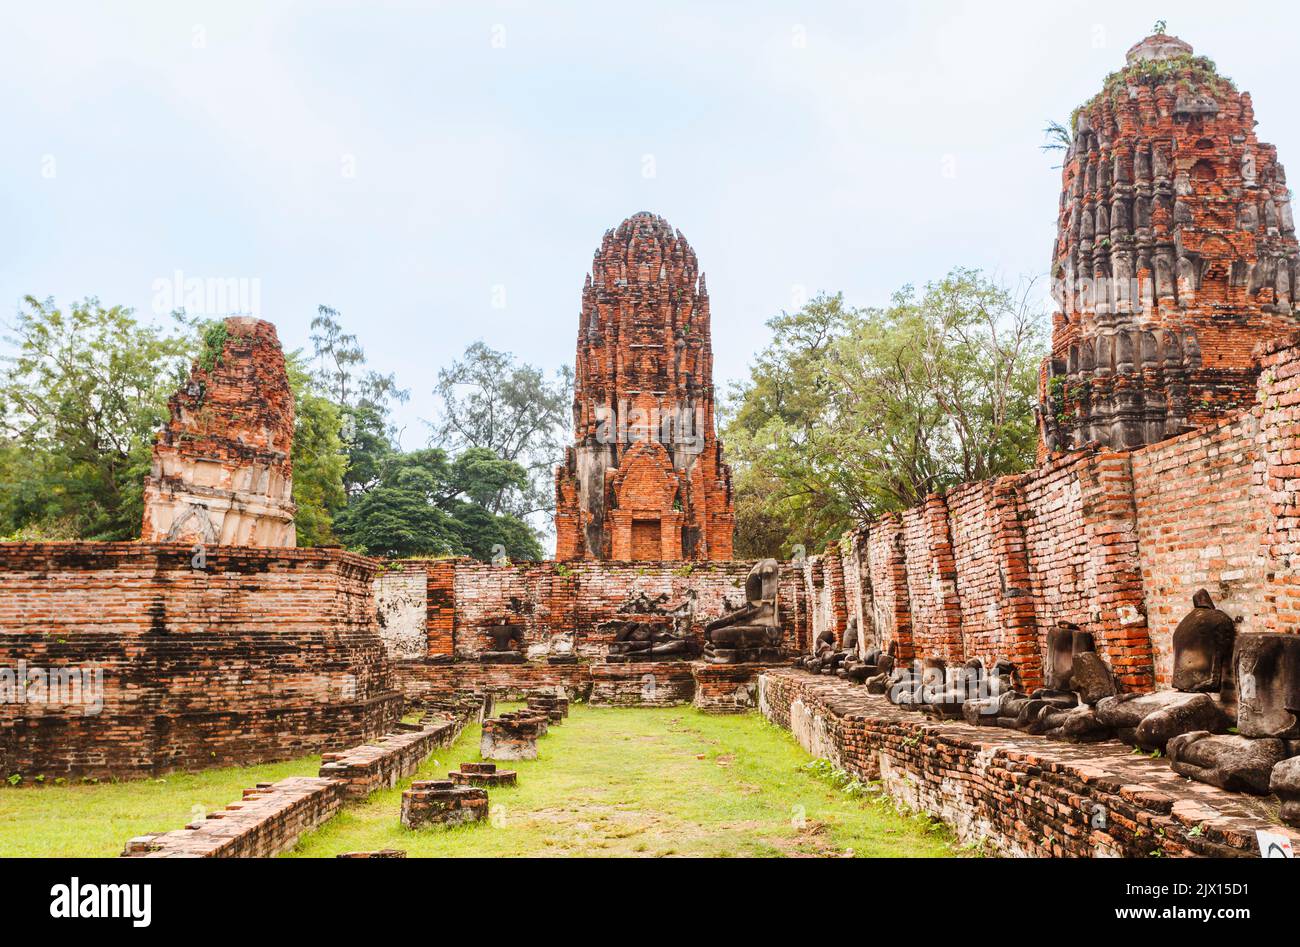 Dilapidated red brick prangs and walls with headless Buddha statues in the ruins at Wat Maha That, the sacred royal temple in Ayutthaya, Thailand Stock Photo